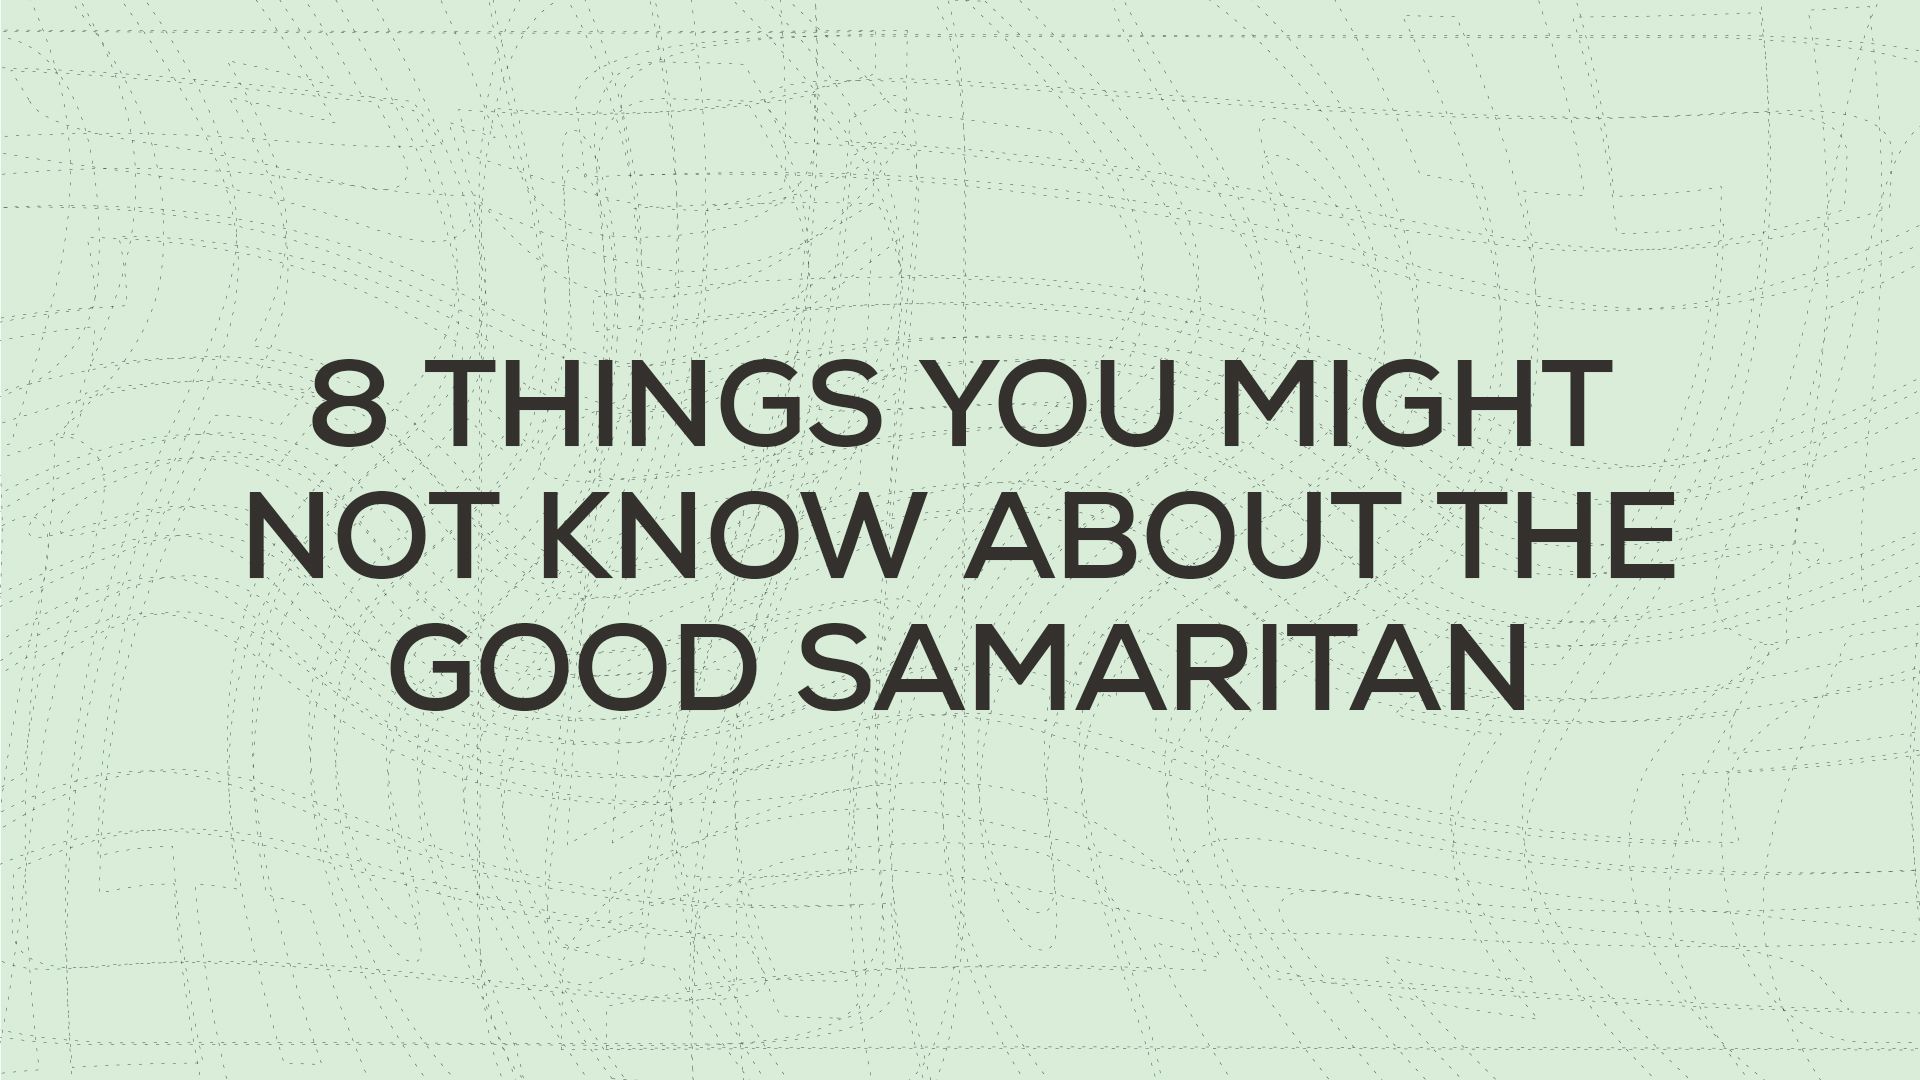 8 Things You Might Not Know About the Good Samaritan Hero Image